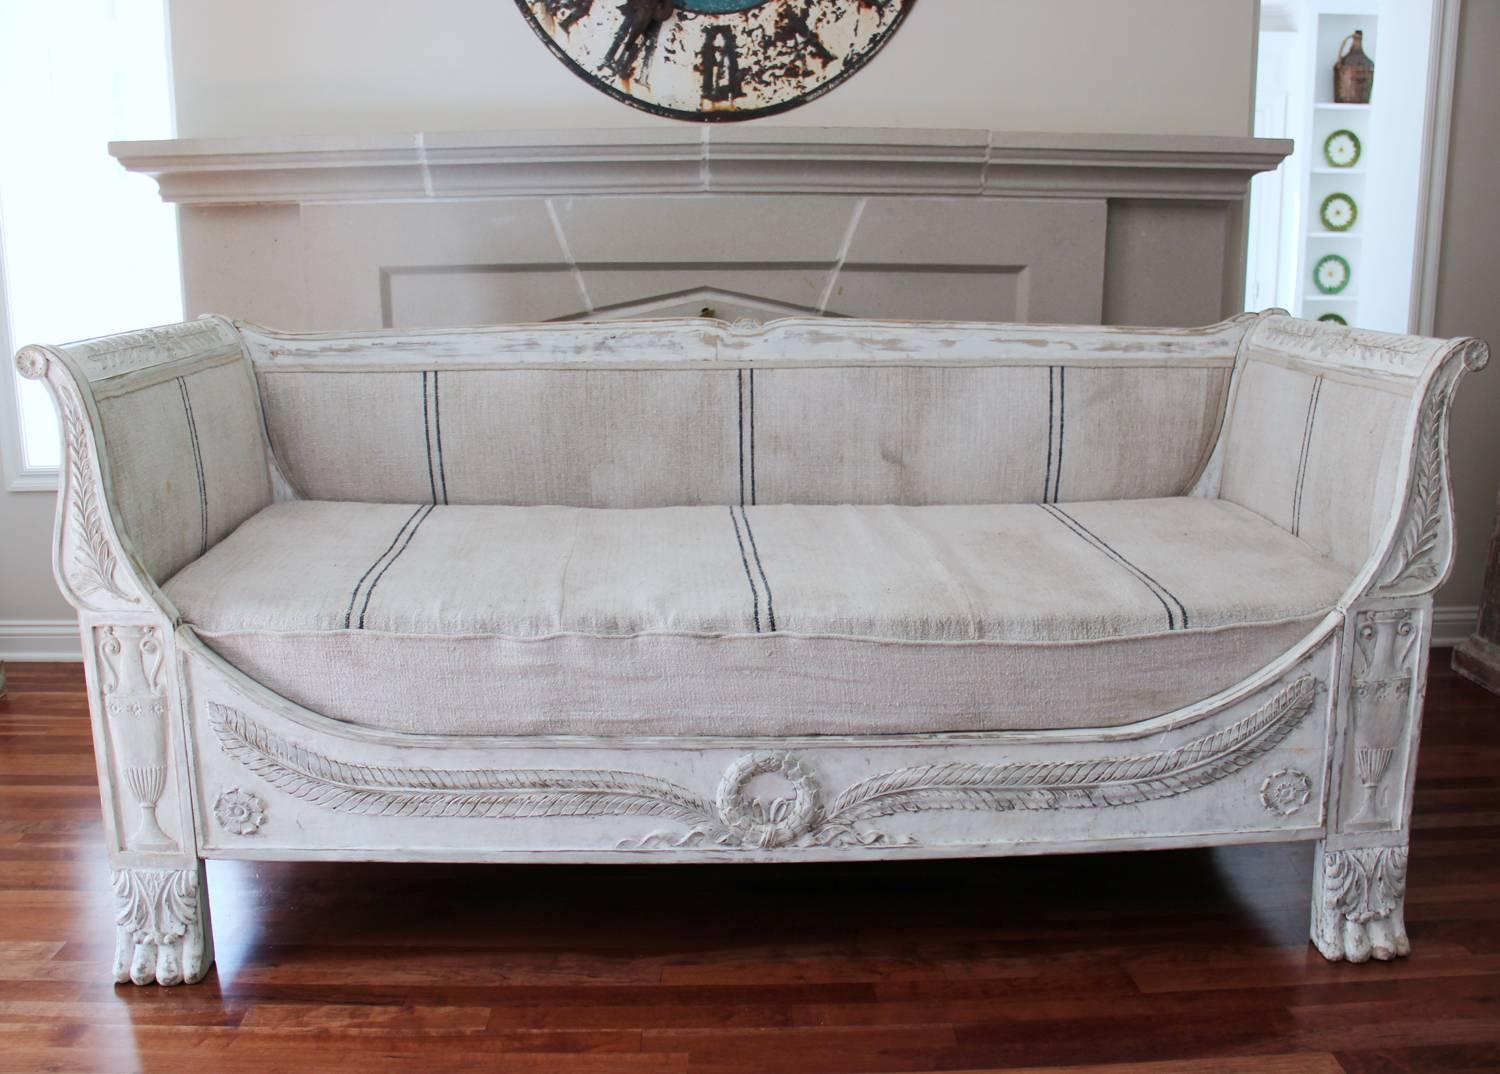 An early 19th century, richly carved, French daybed or settee from the Empire period with a beautiful painted white patina. This sofa sits comfortably, with a soft, yet firm seat. It has been newly upholstered in fine antique French linen. Measures: